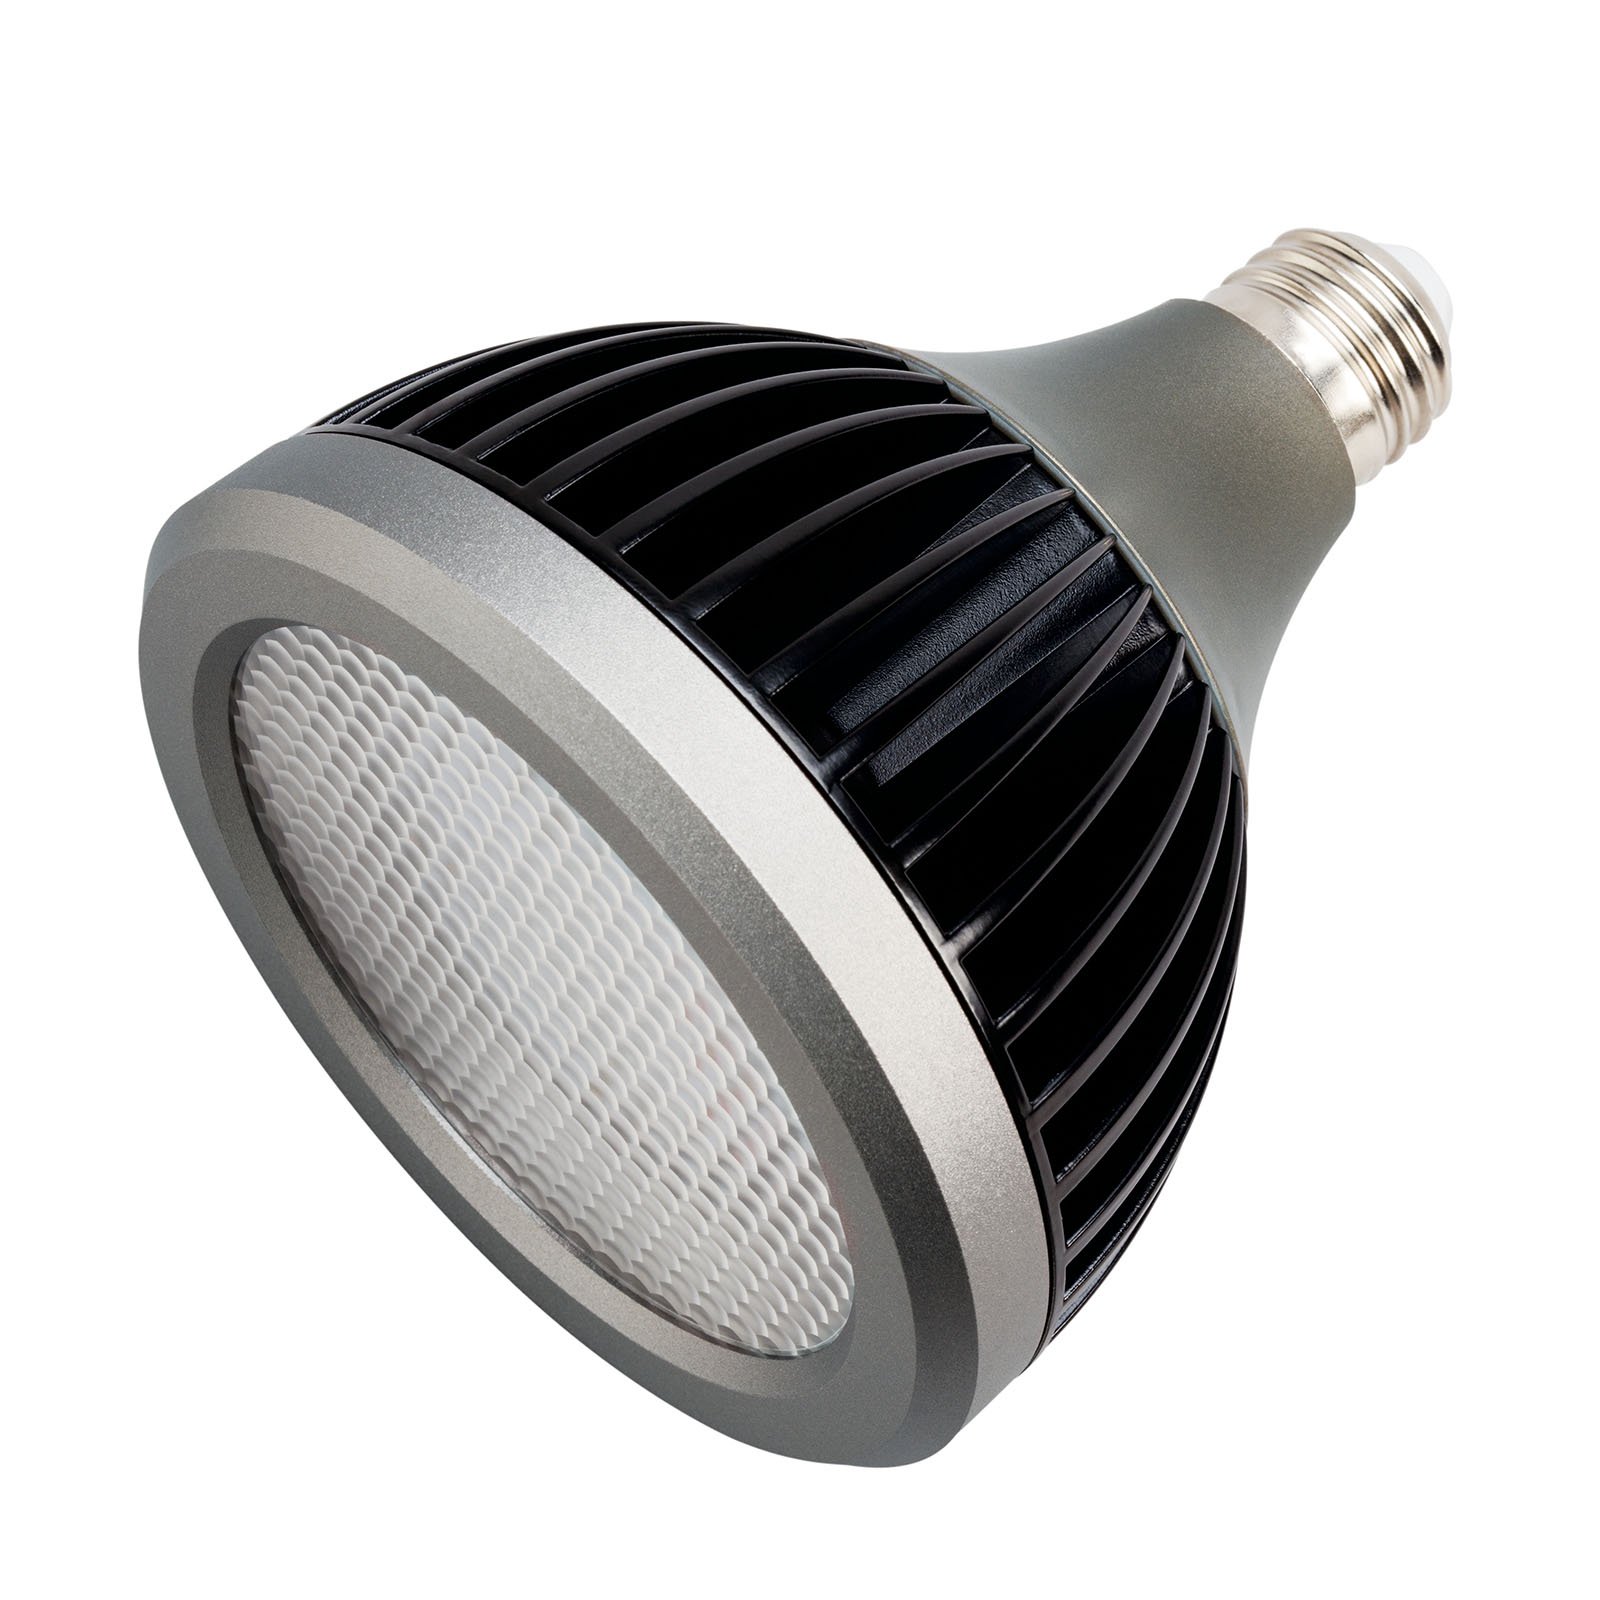 This wet location PAR38 120V-277V LED lamp compares to the 75W Halogen. Featuring a 4200K cool white temperature, this lamp puts forth a 40-degree flood beam spread angle. This product is designed for use in an enclosed or open fixture.